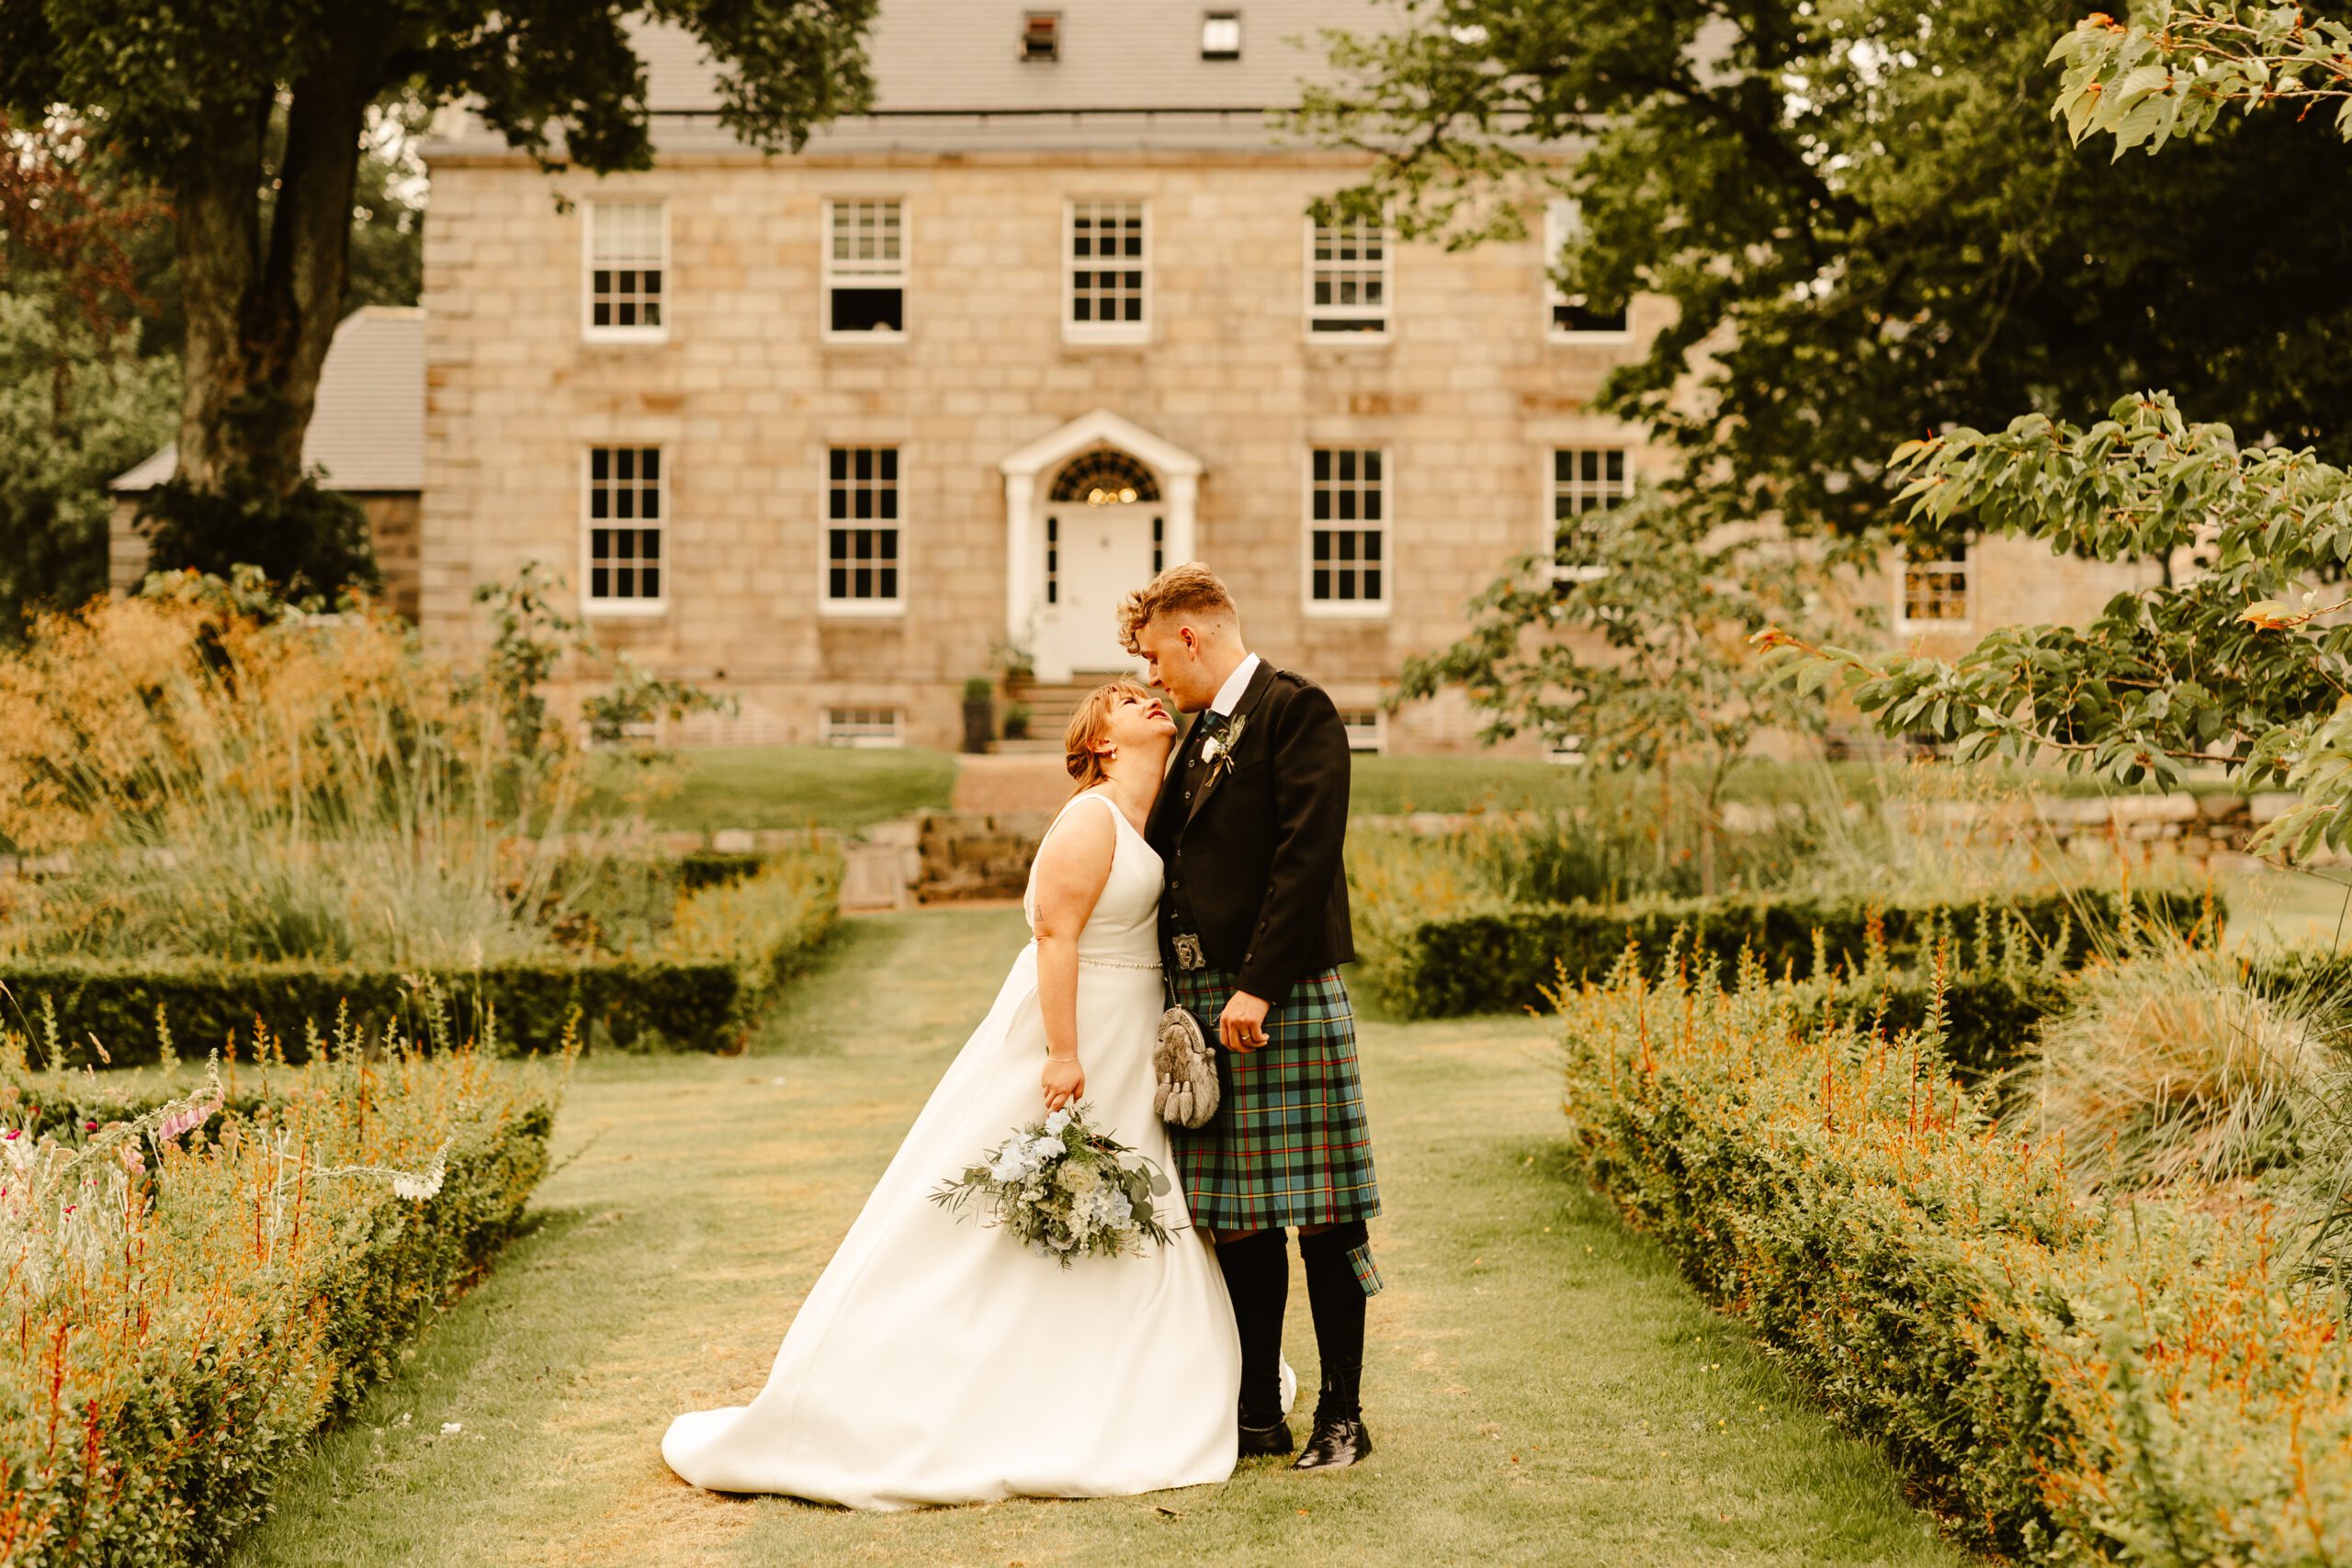 Couple embrace on the grass on their wedding day at Elrick House wedding venue